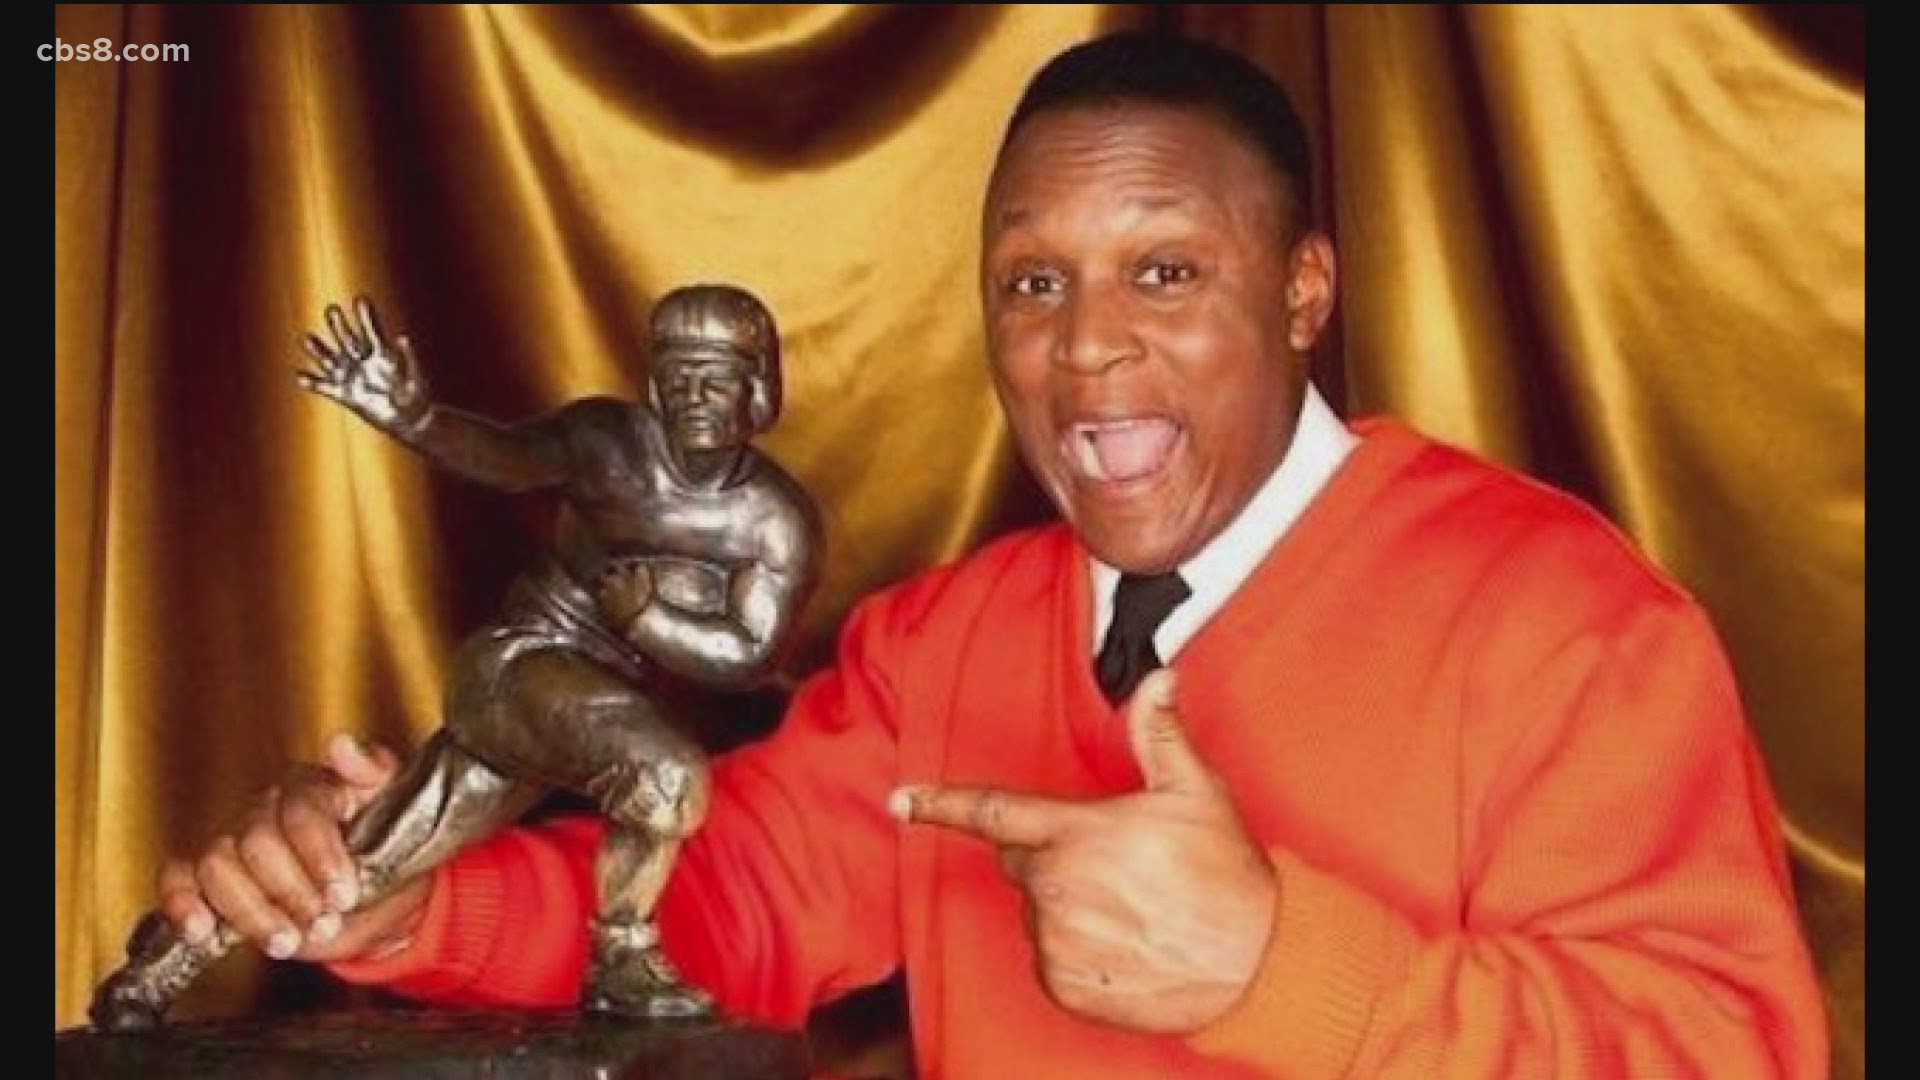 Former Detroit Lion and legendary, hall of fame running back, Barry Sanders promotes a Super Bowl Sweepstakes event.